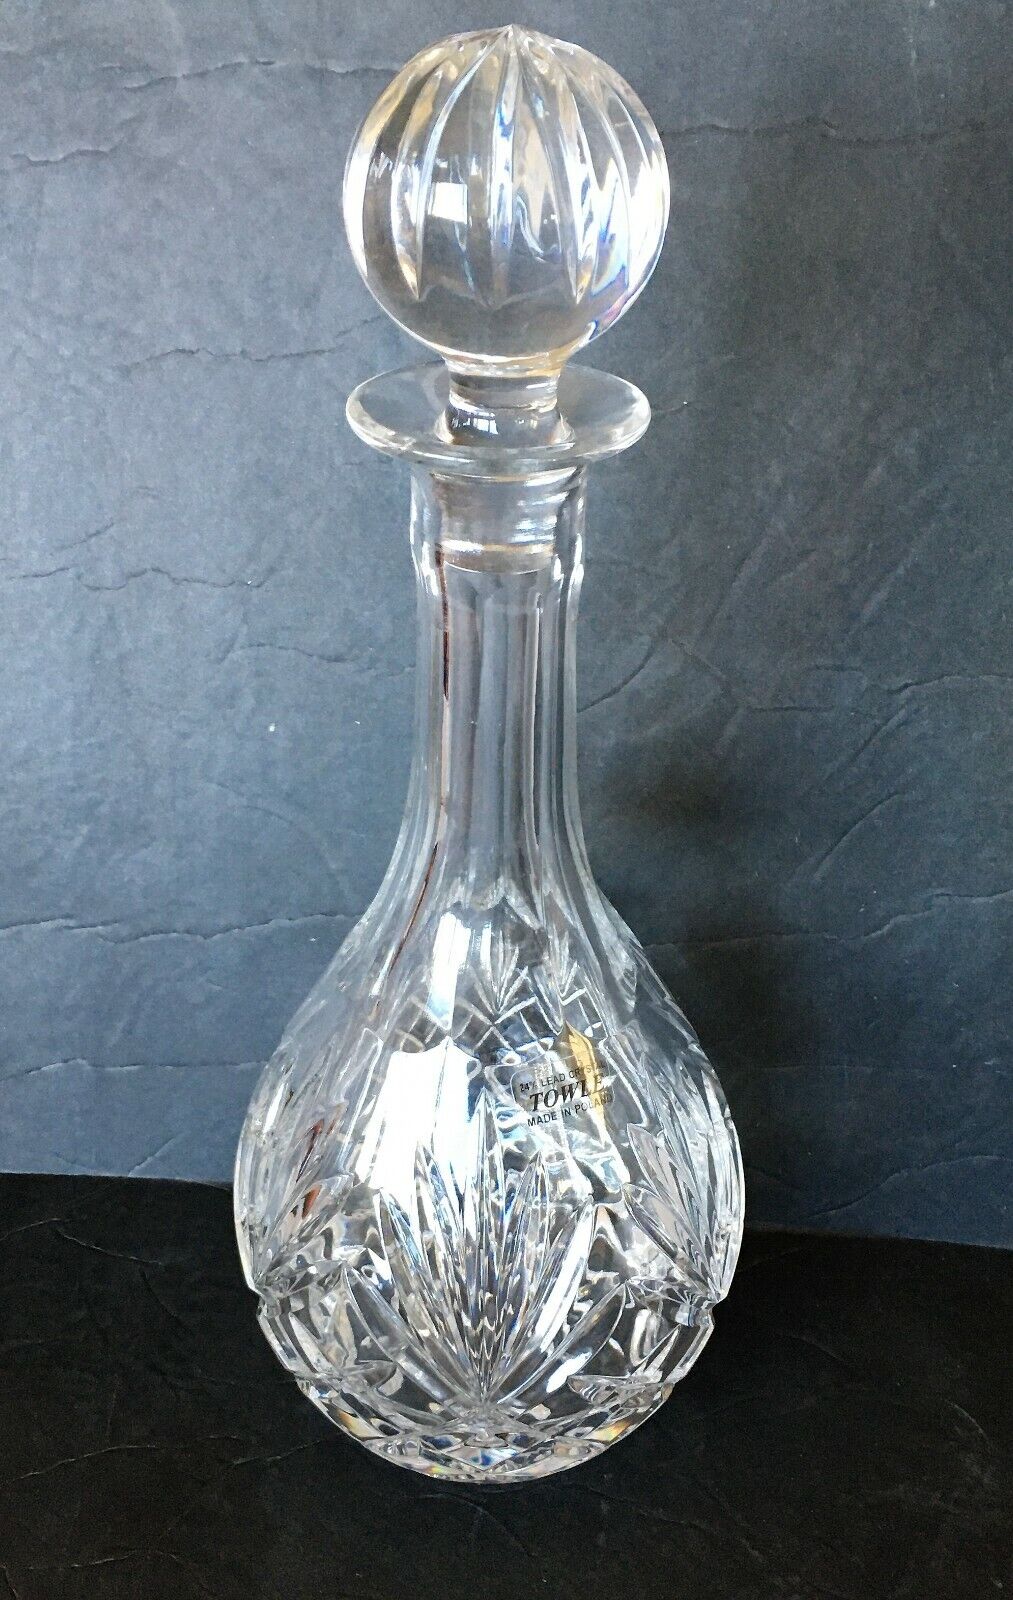 NEW - Towle Lead 24% Crystal Decanter with Stopper 13\